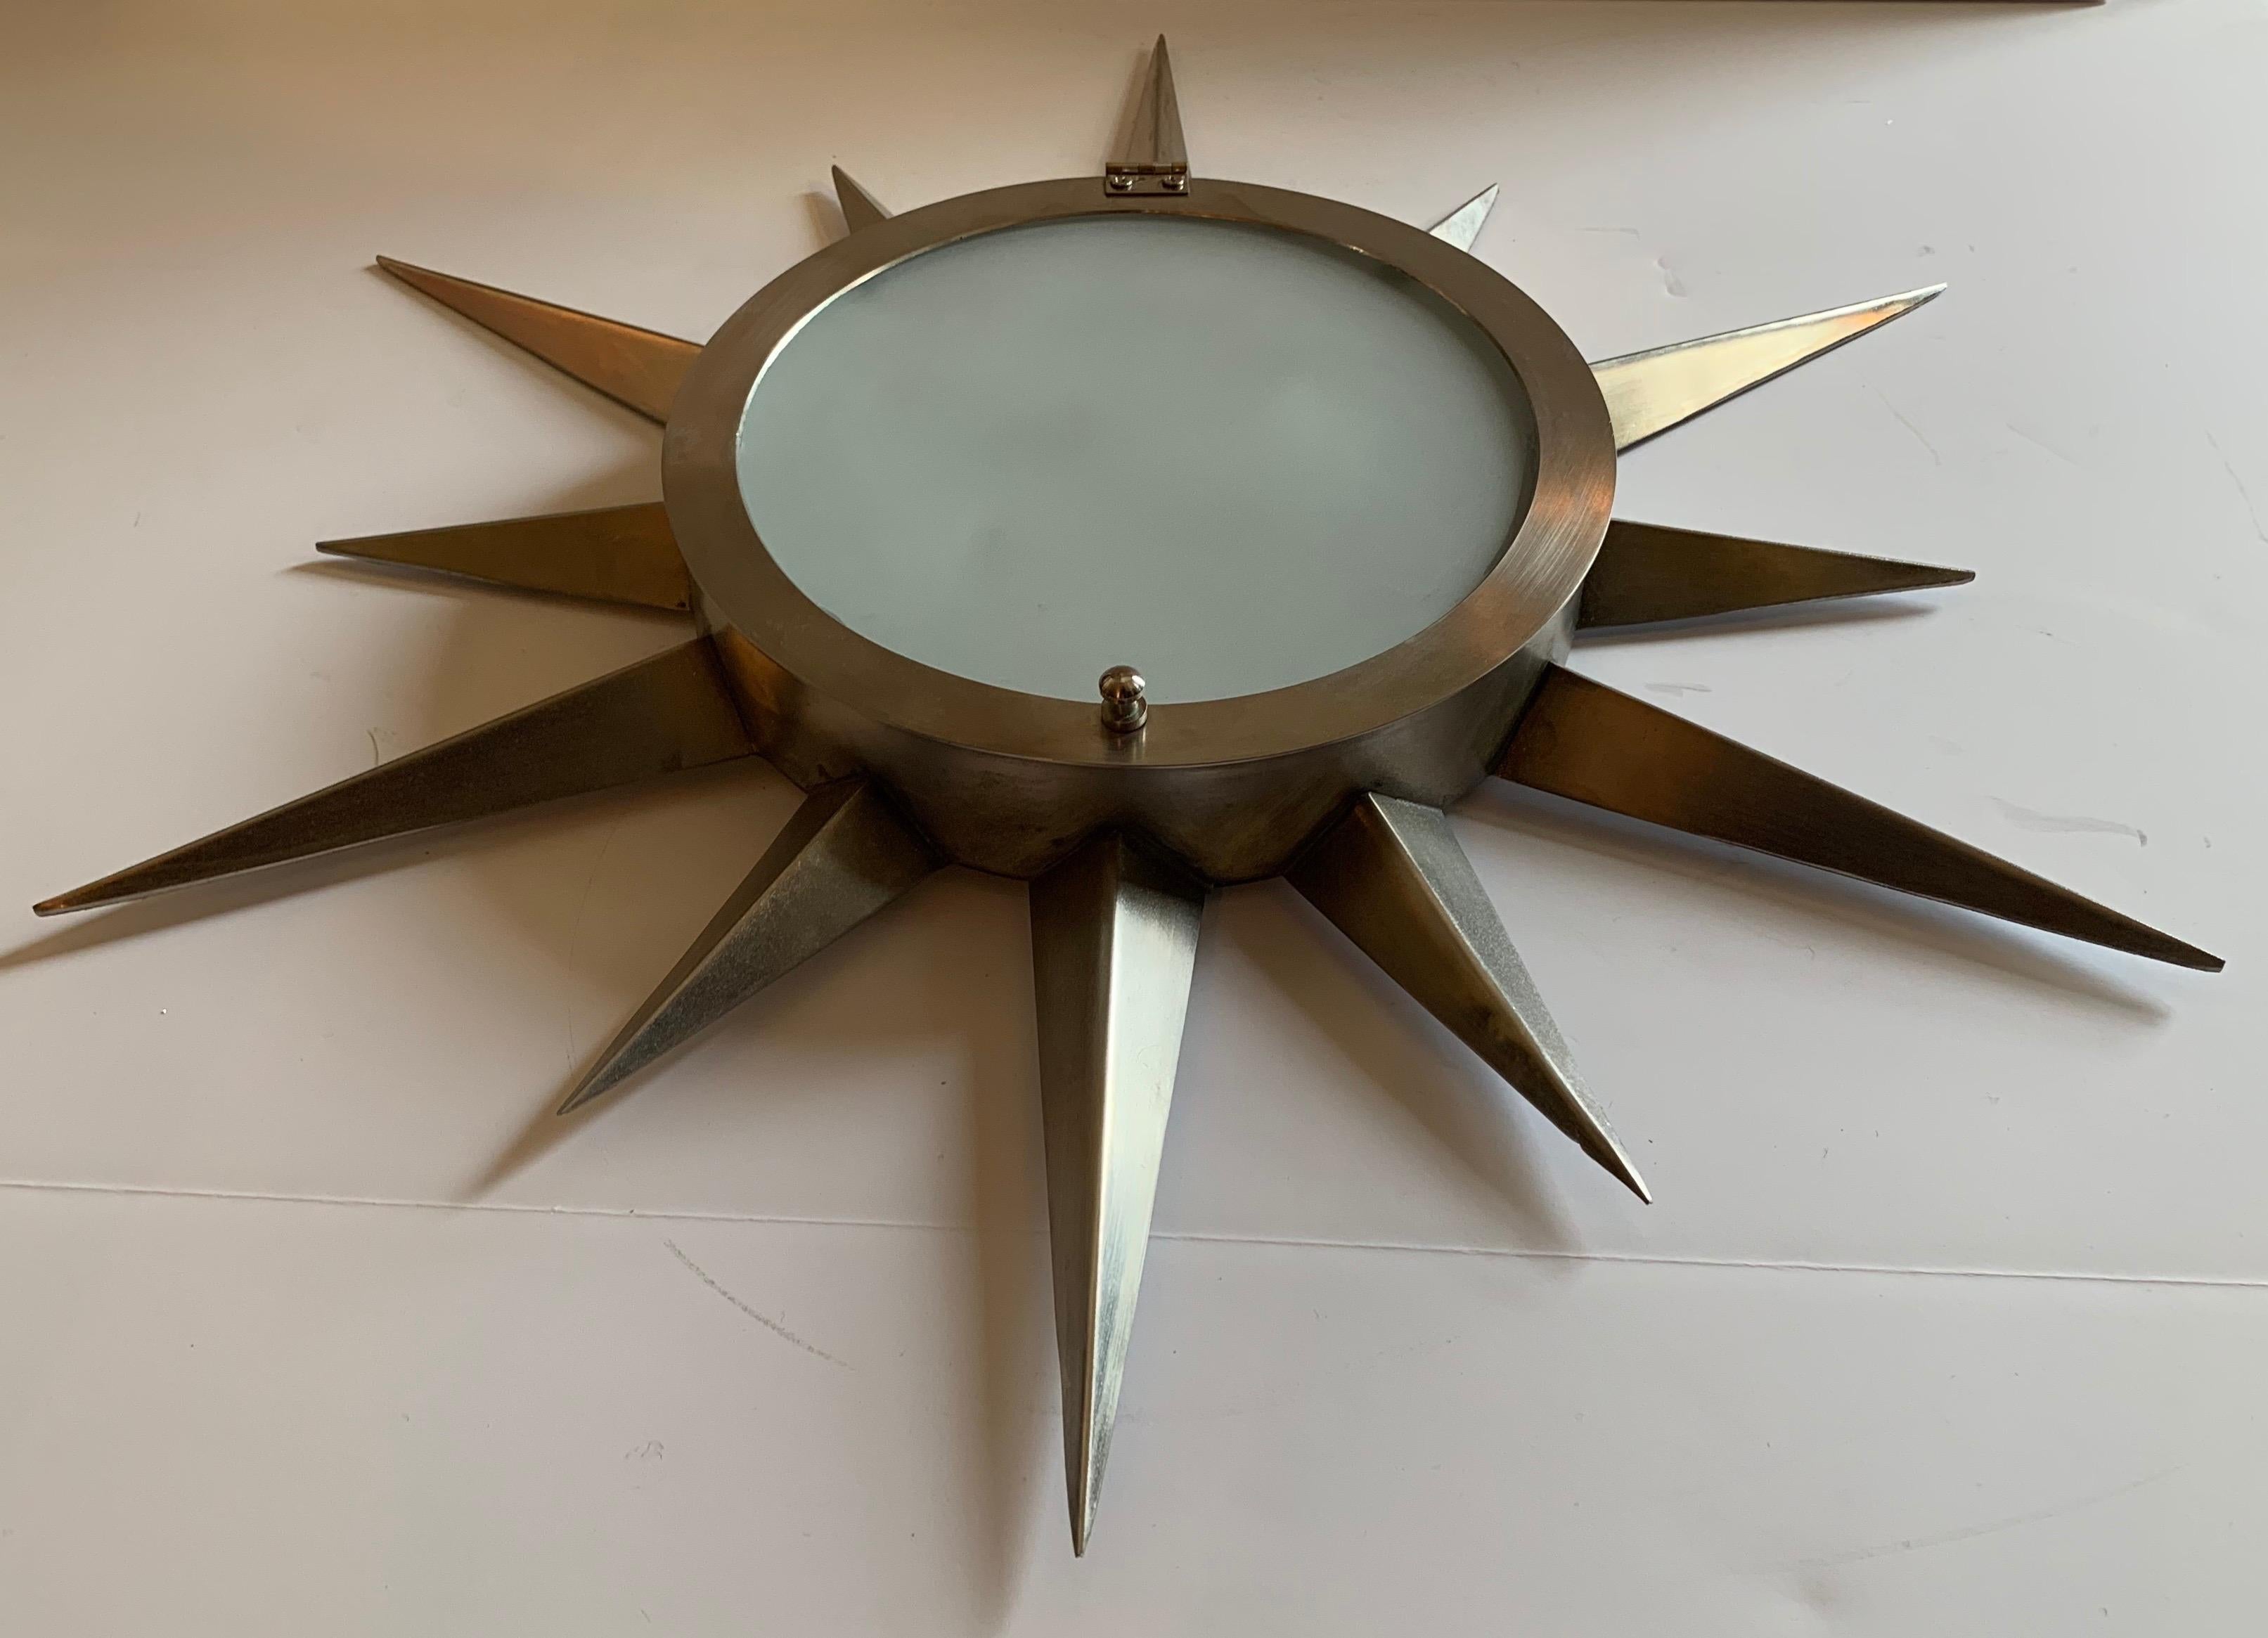 A fine Mid-Century Modern brush brass star form frosted glass flush mount ceiling light fixture with 2 candelabra sockets

